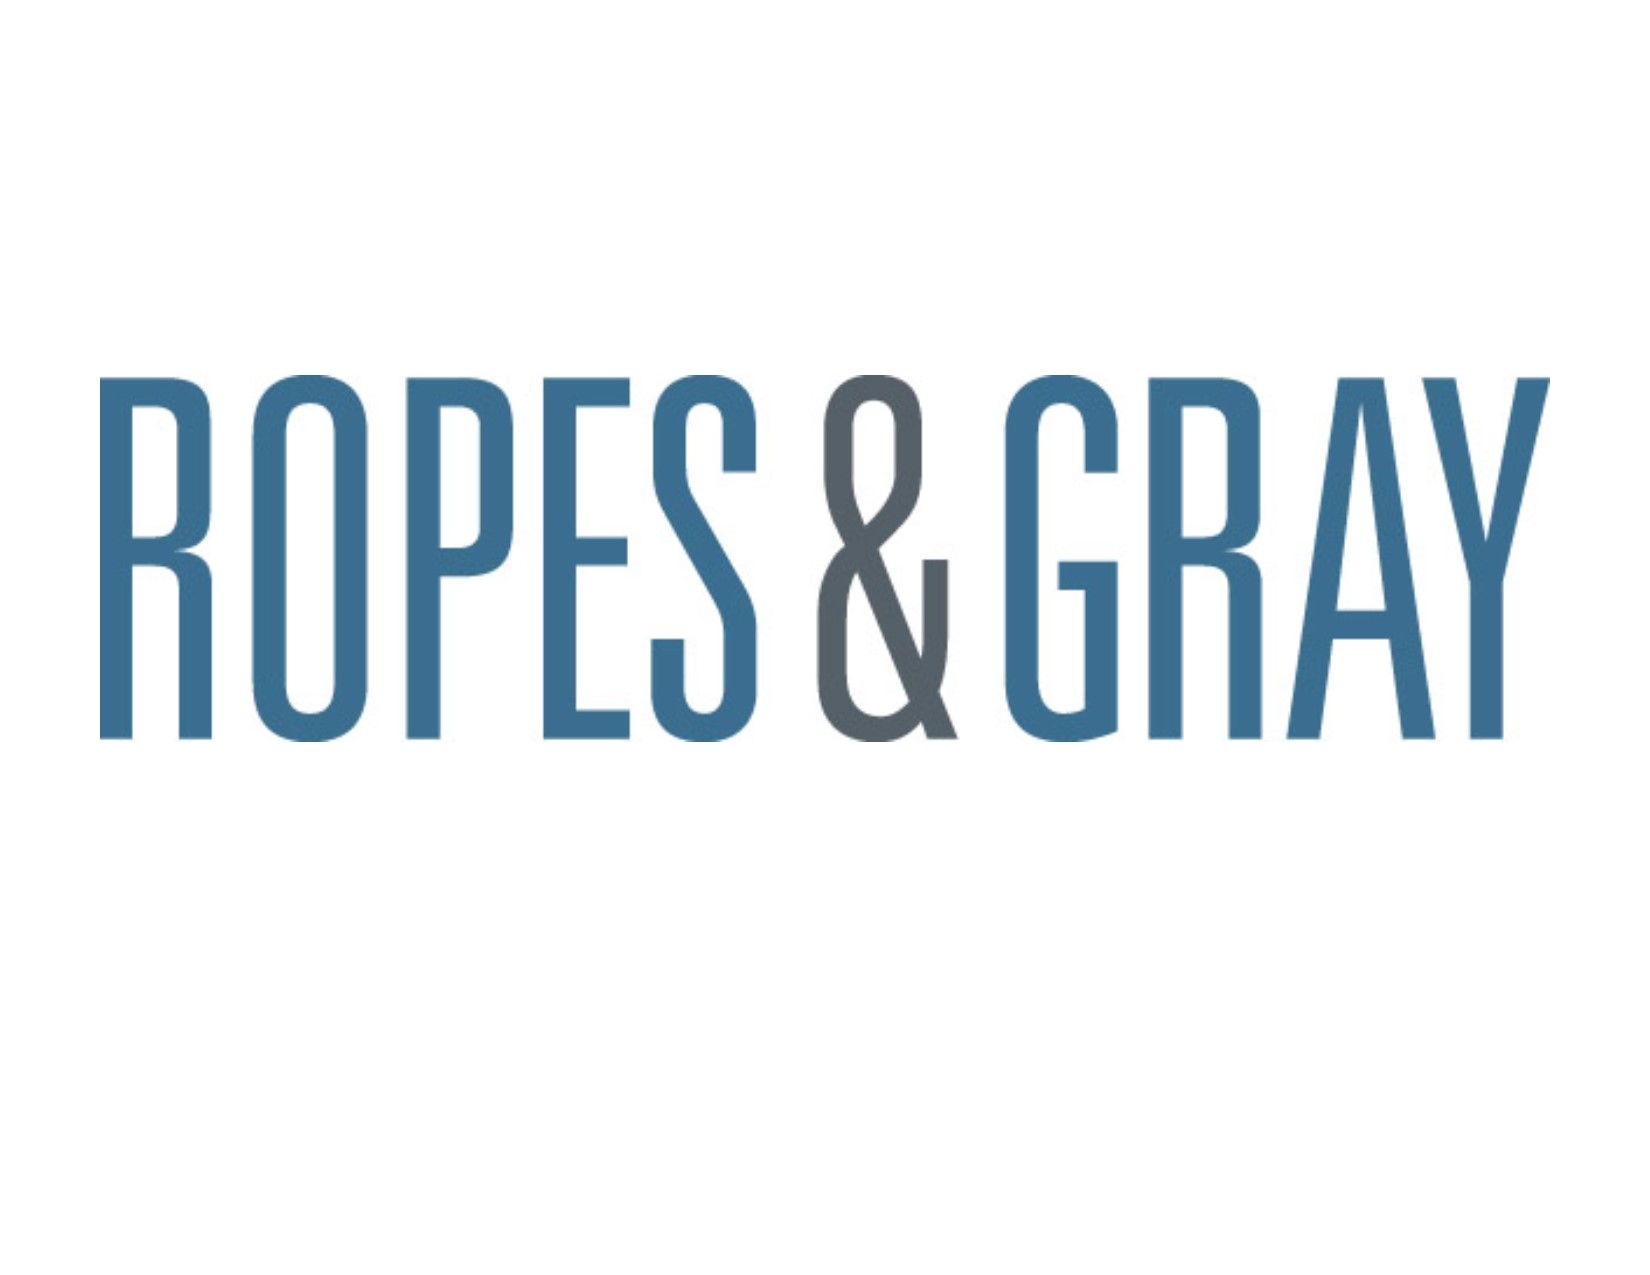 Ropes and Gray